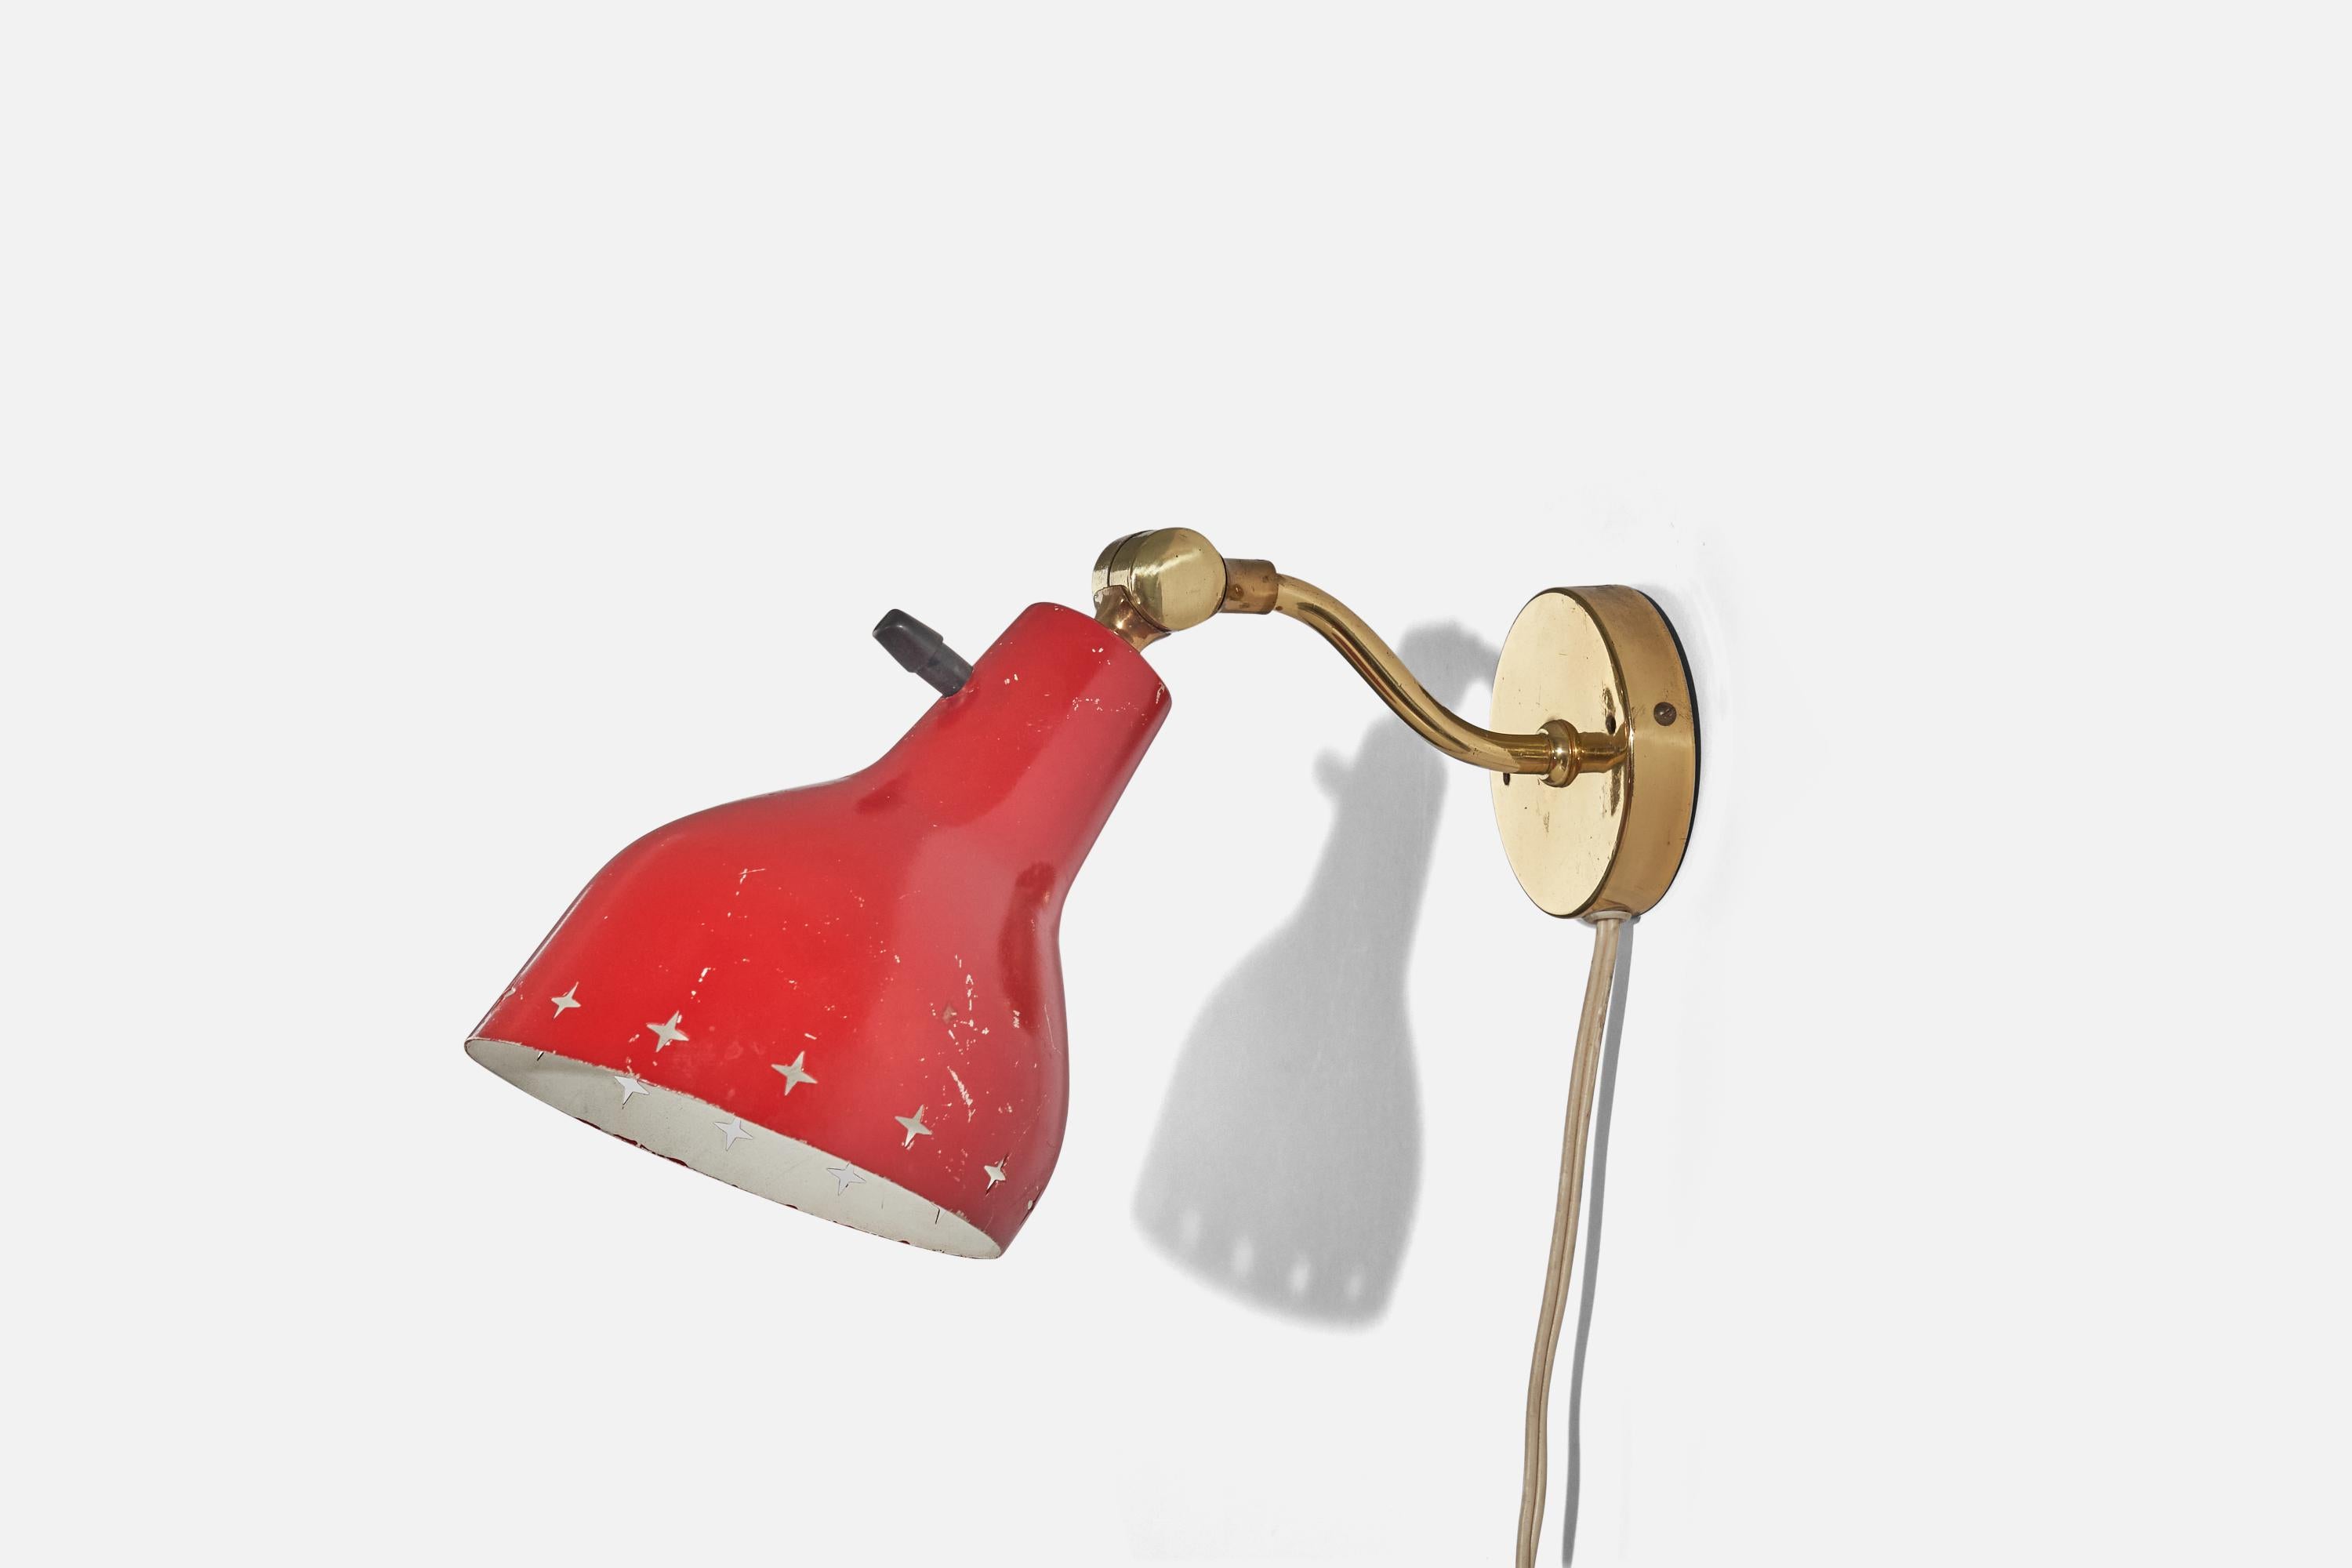 A brass and red-lacquered metal sconce designed and produced in Sweden, c. 1950s.

